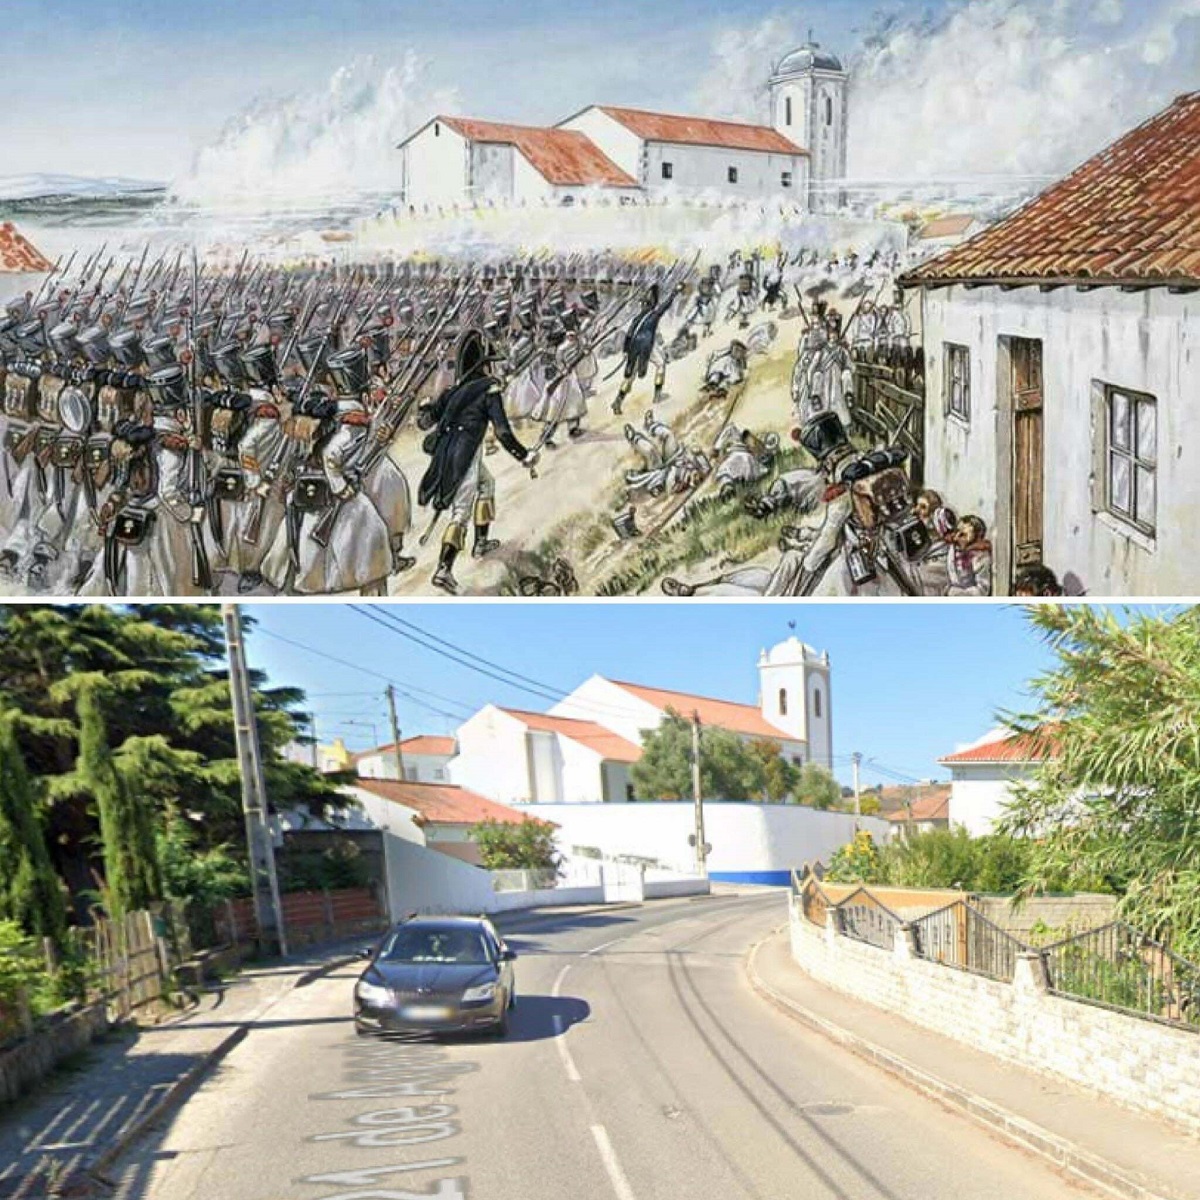 I Saw This Post On R/Battlepaintings And Did Some Poking Around. Battle Of Vimeiro (Portugal) 1808 By Patrice Courcelle… And Today